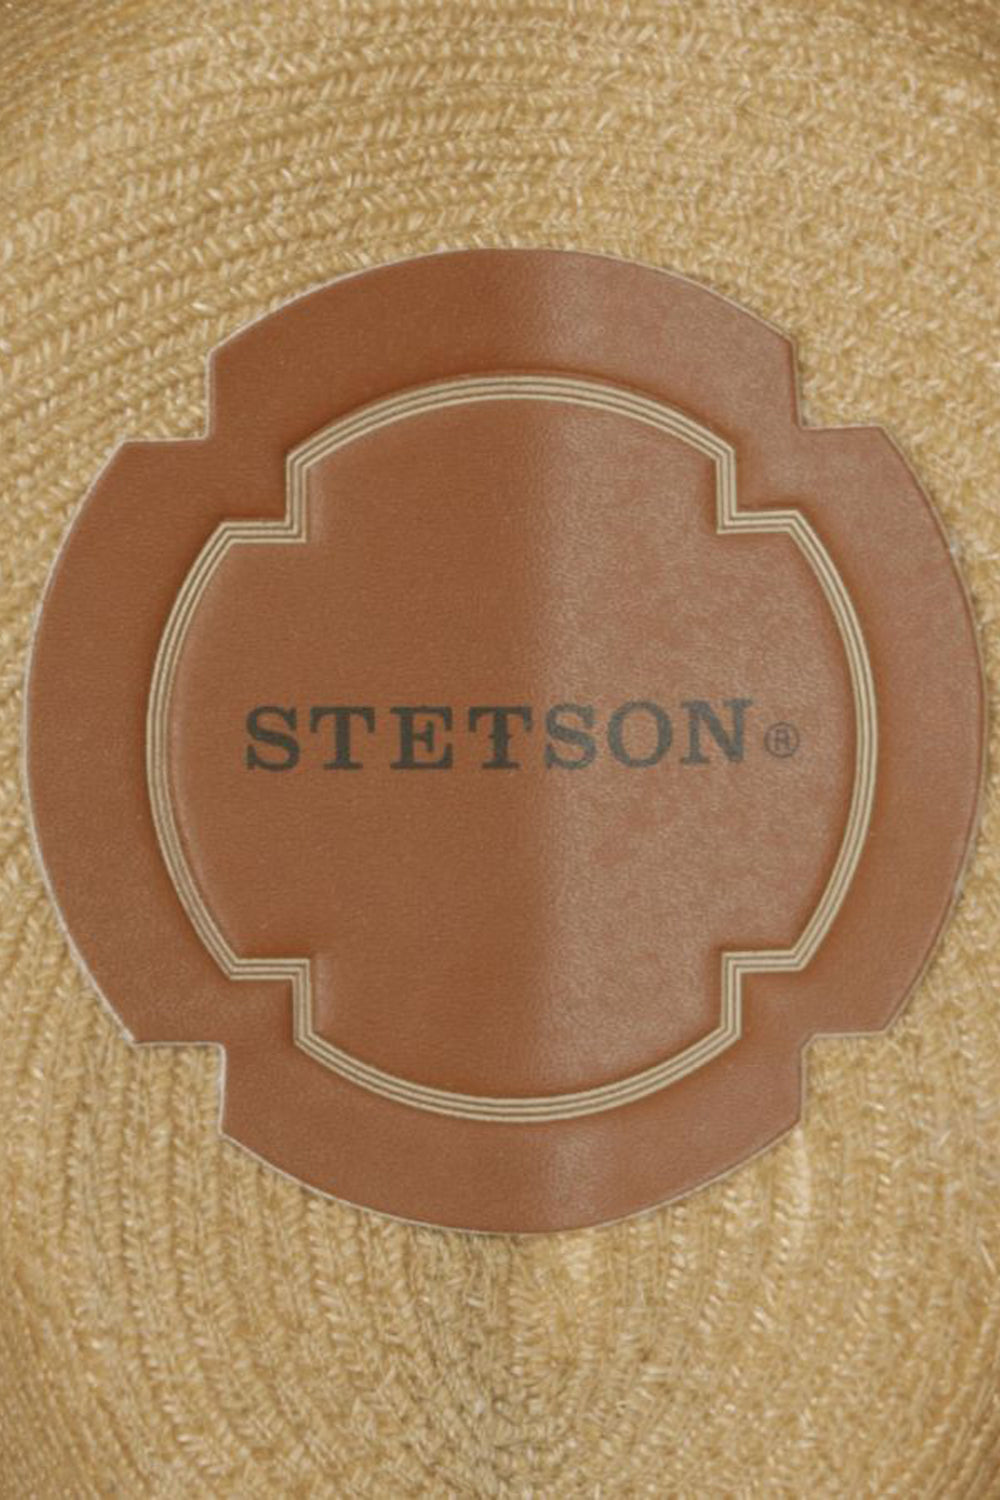 Buy the Stetson Kendrick Fedora Hemp Hat in Brown/Beige at Intro. Spend £50 for free UK delivery. Official stockists. We ship worldwide.